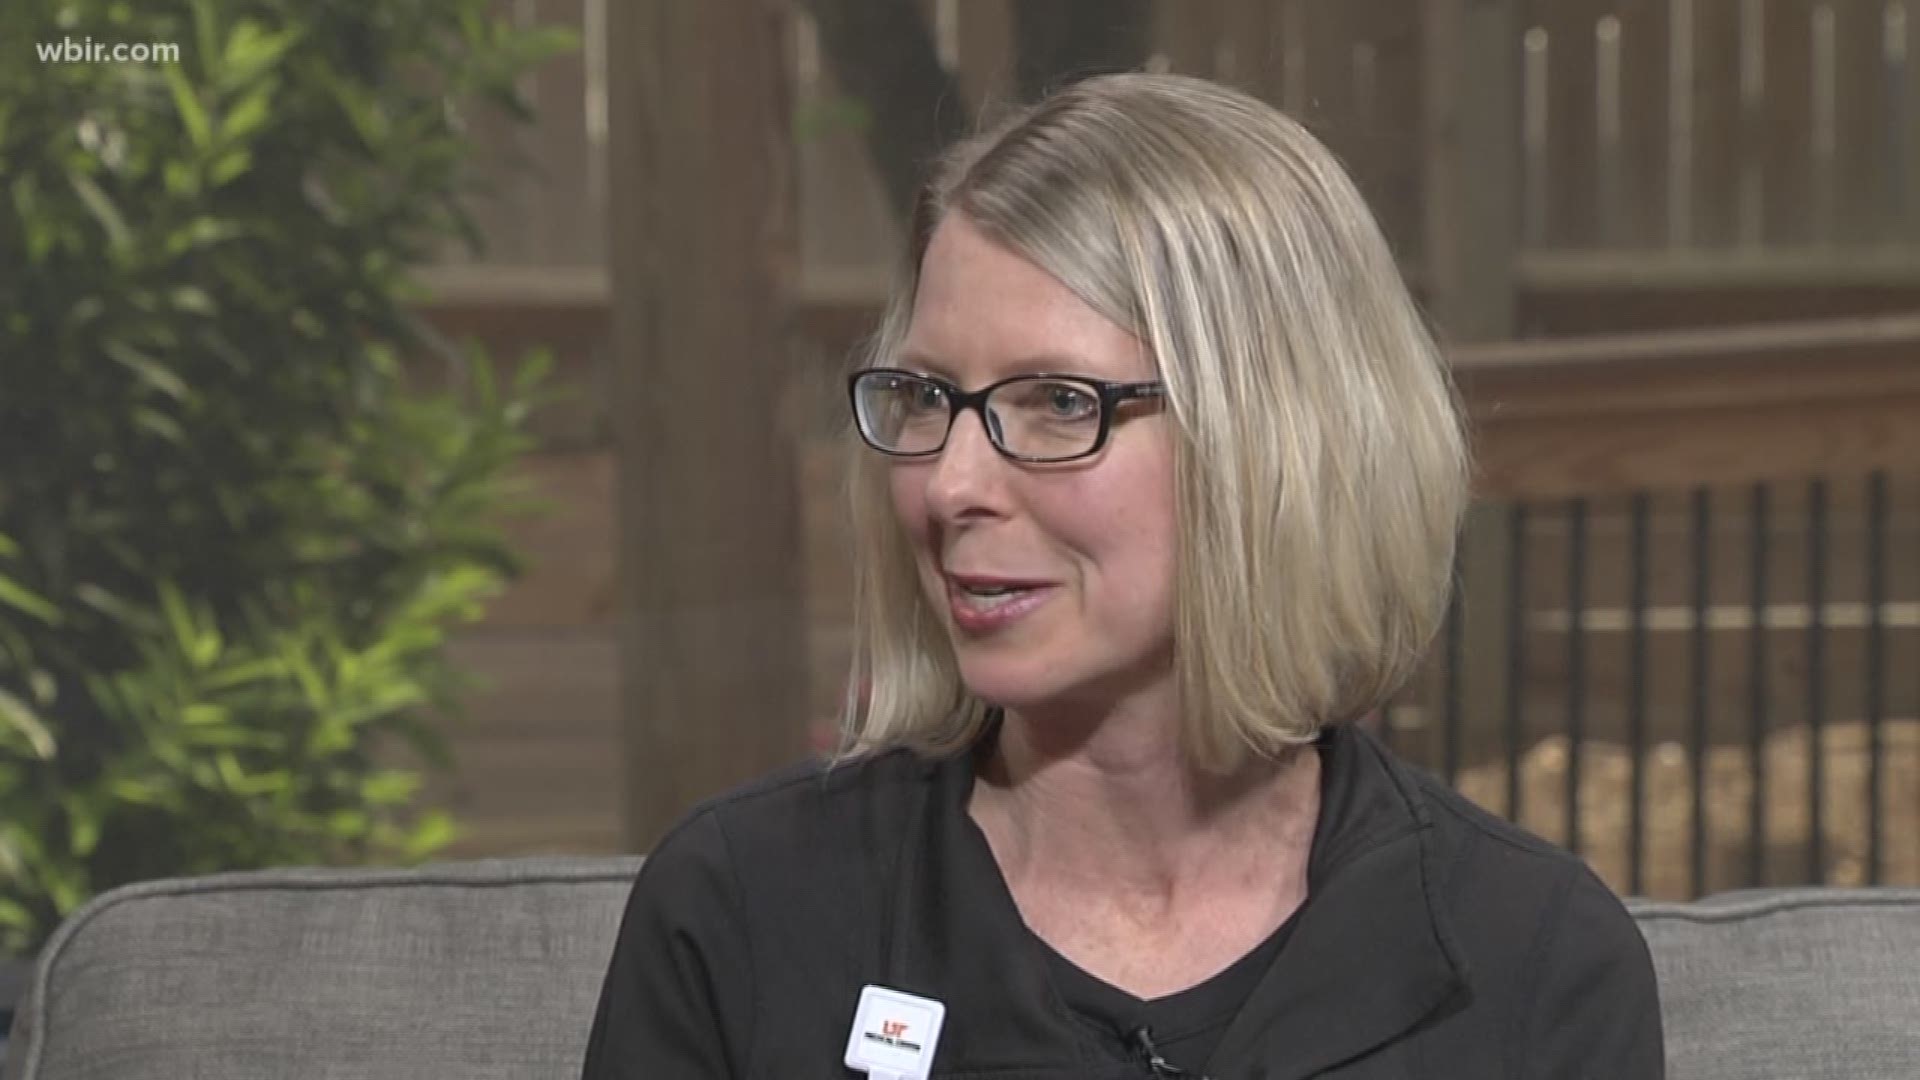 Exercise has a wide range of benefits and multiple studies show adults aren't getting enough of it. UT Medical Center Fitness Manager Amy Shafer is here now to talk about why we should treat exercise like medicine.